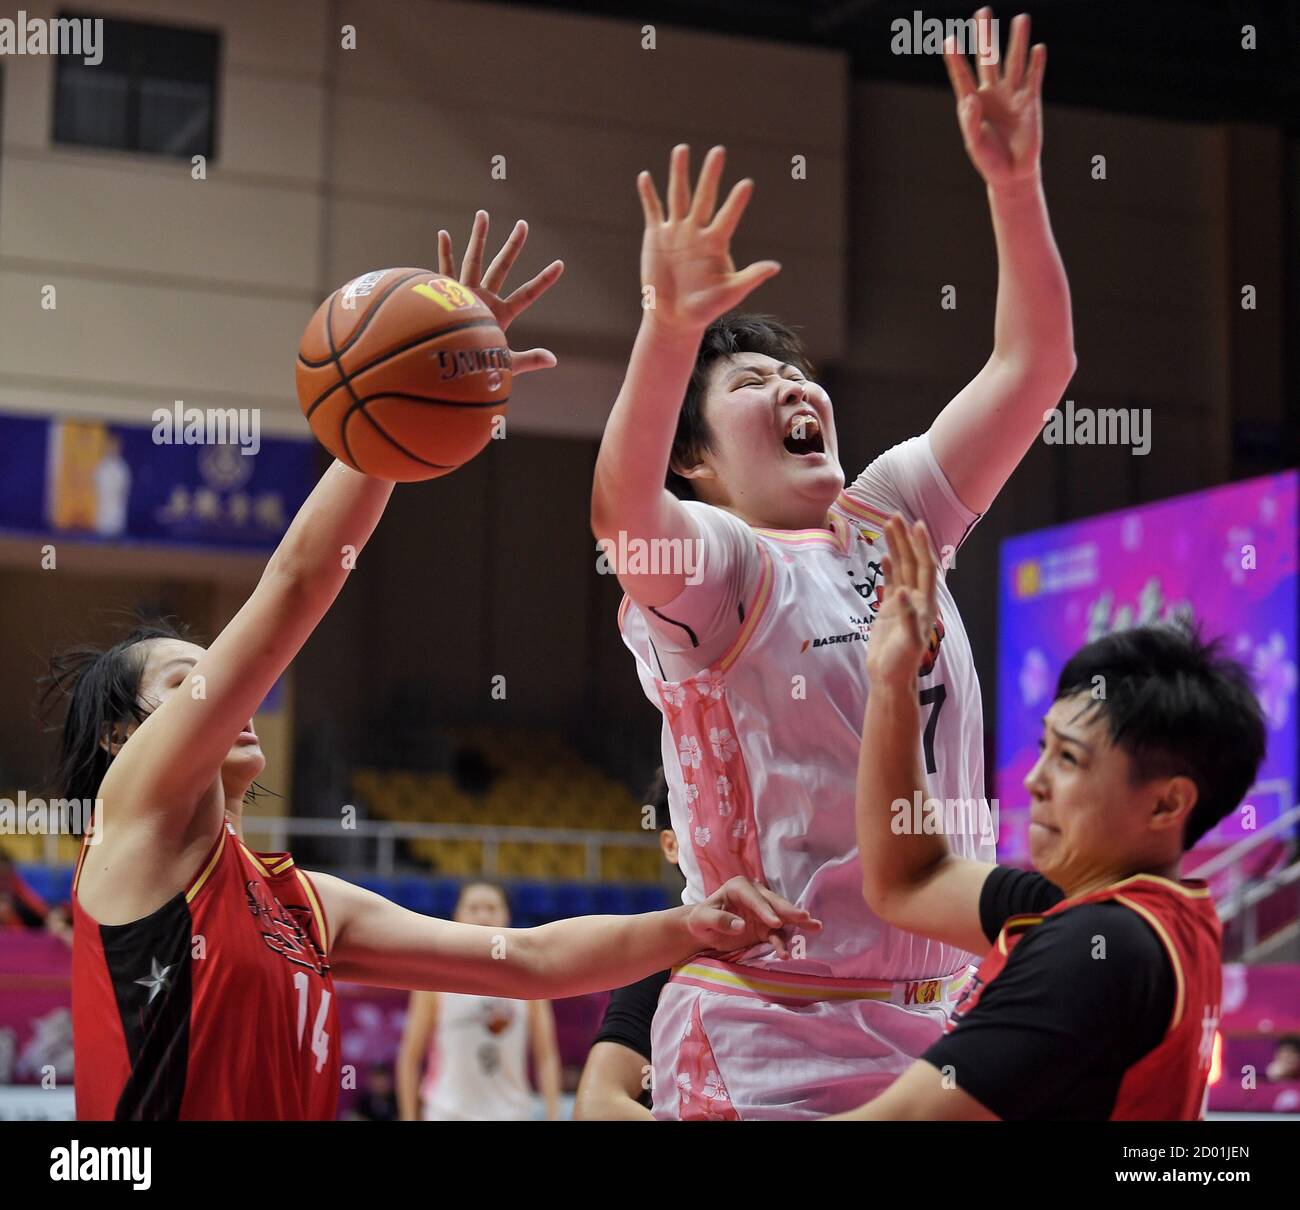 Chengdu, China's Sichuan Province. 2nd Oct, 2020. Ma Jiaying (above) of Shaanxi competes during 1st round match between Shaanxi and Wuhan SF at the 2020-21 Women's Chinese Basketball Association (WCBA) league in Chengdu, capital of southwest China's Sichuan Province, Oct. 2, 2020. Credit: Liu Kun/Xinhua/Alamy Live News Stock Photo